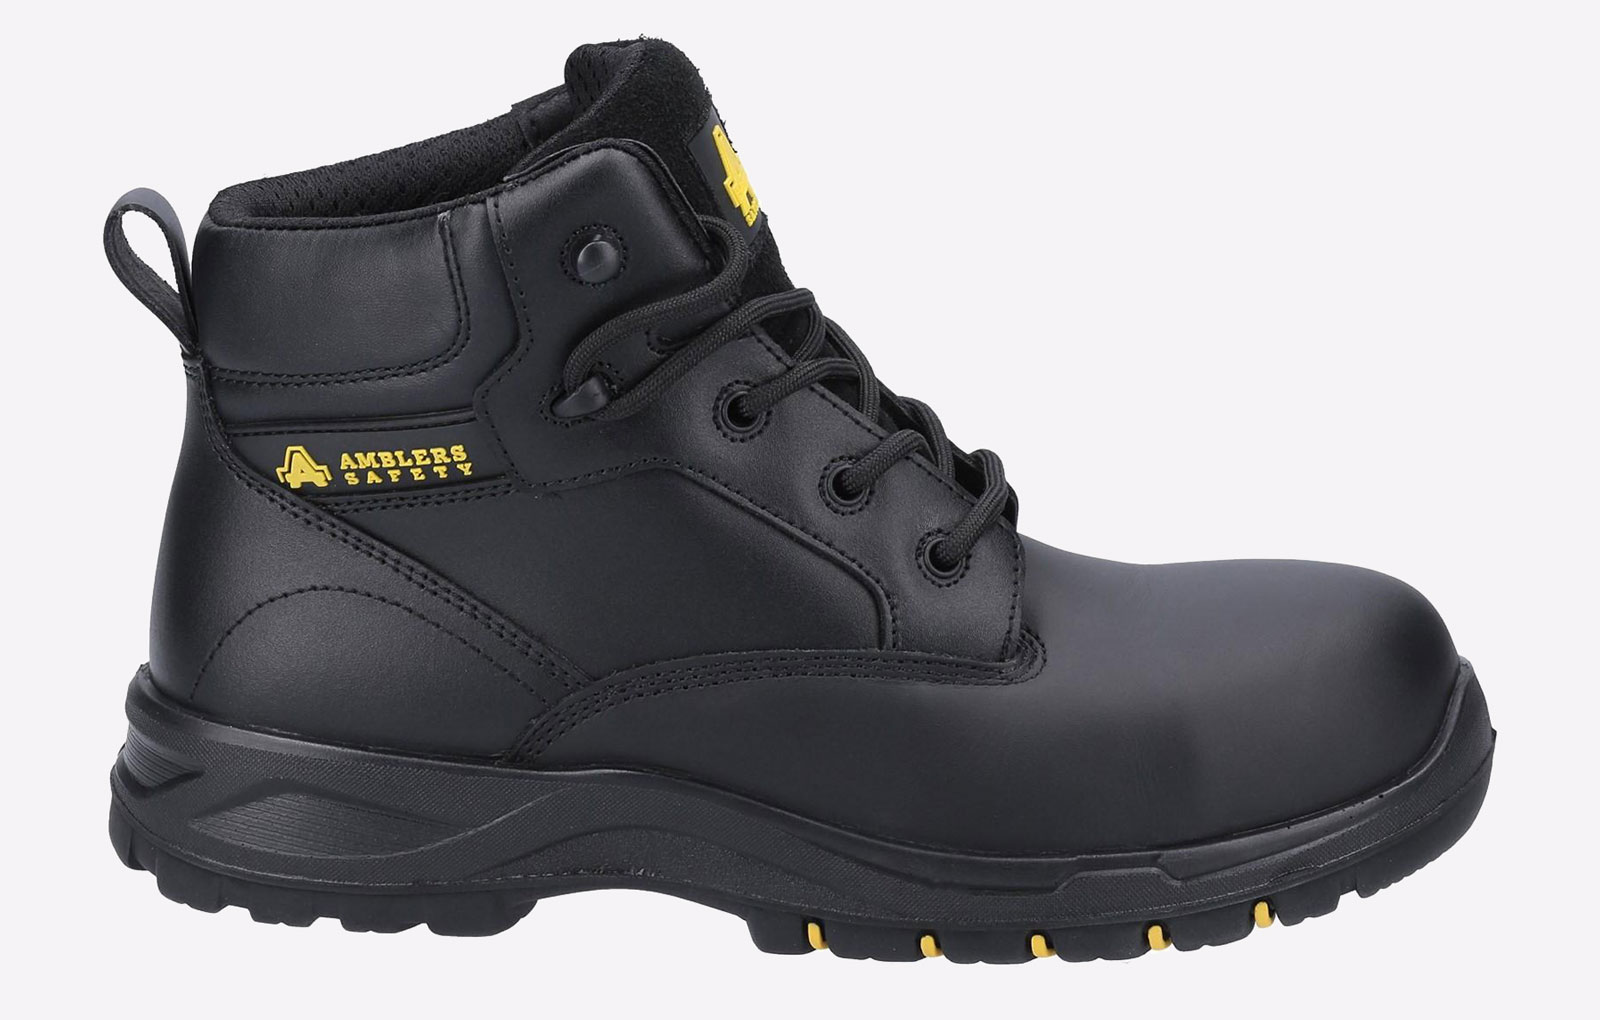 Amblers Safety AS605C Safety Boots Womens - GRD-31375-53685-10